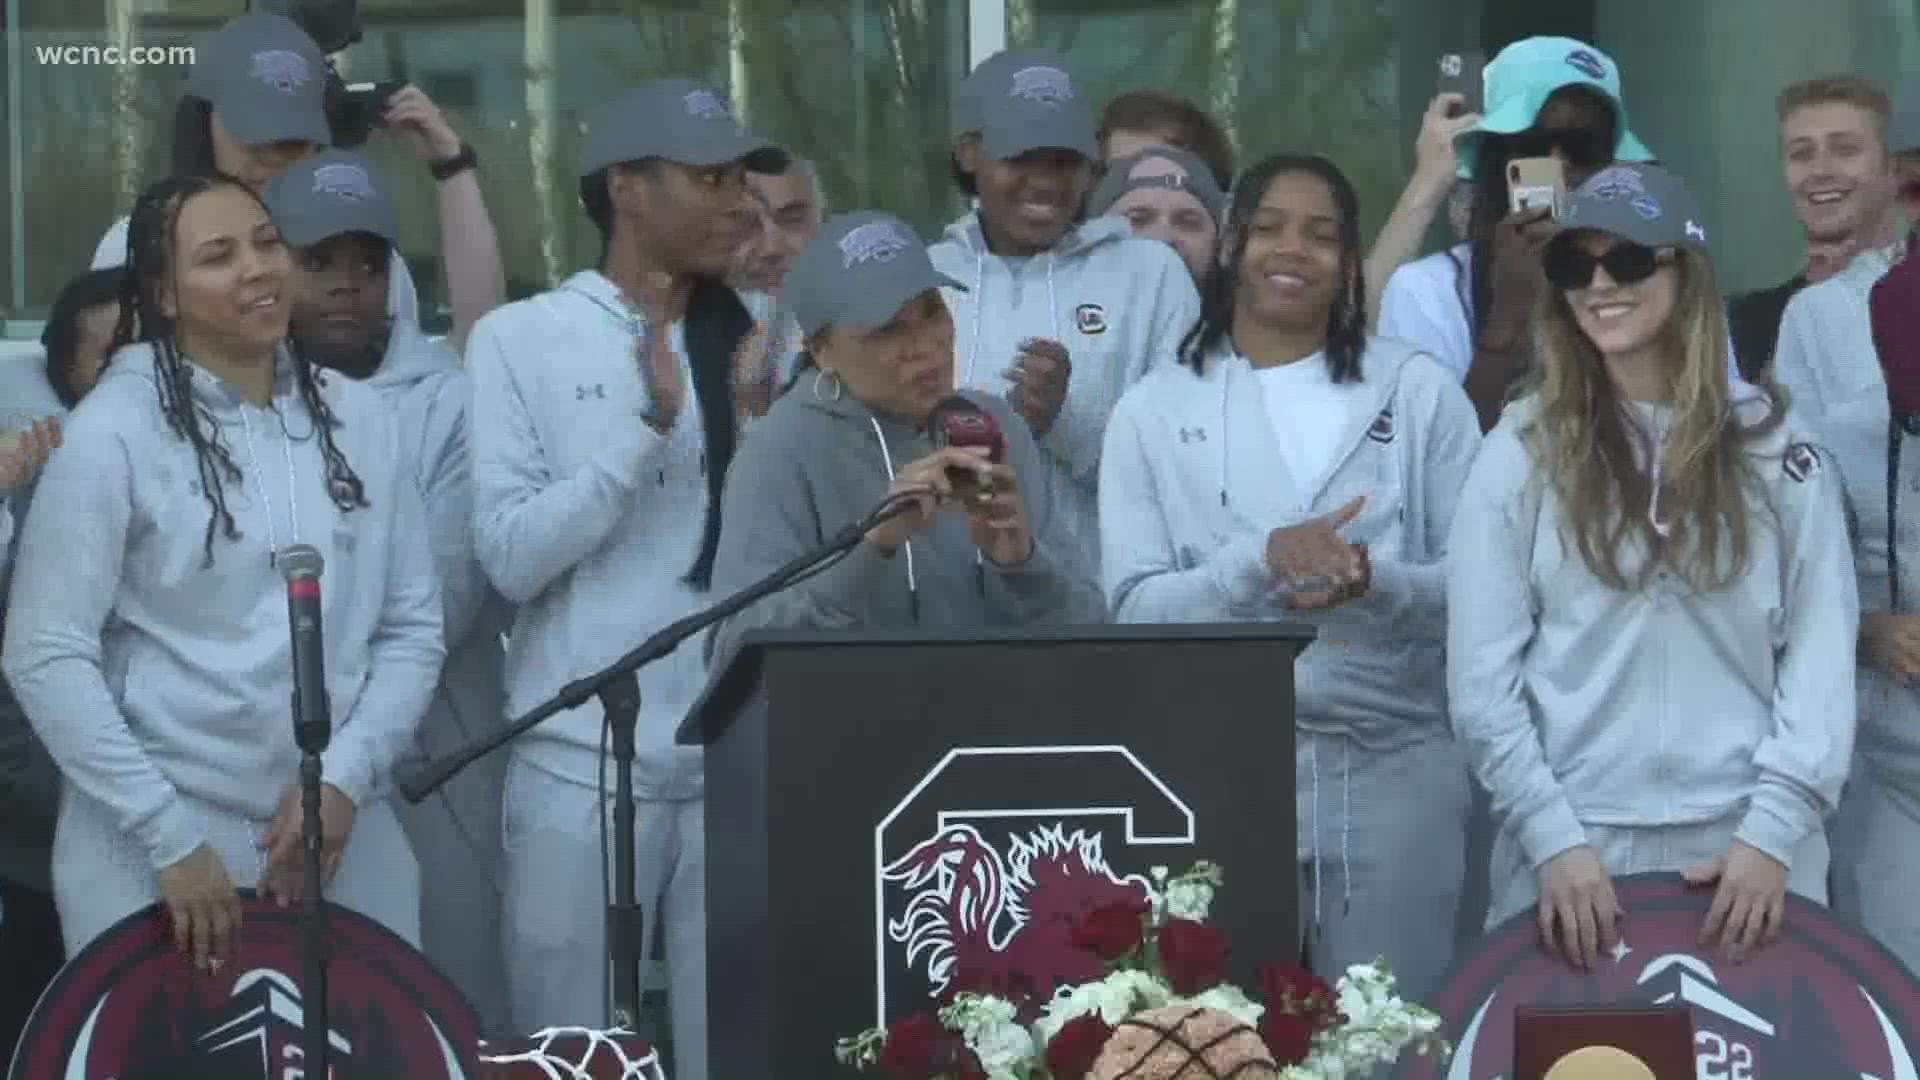 Fans have gathered outside Colonial Life Arena in Columbia Monday to welcome home the NCAA National Champions.